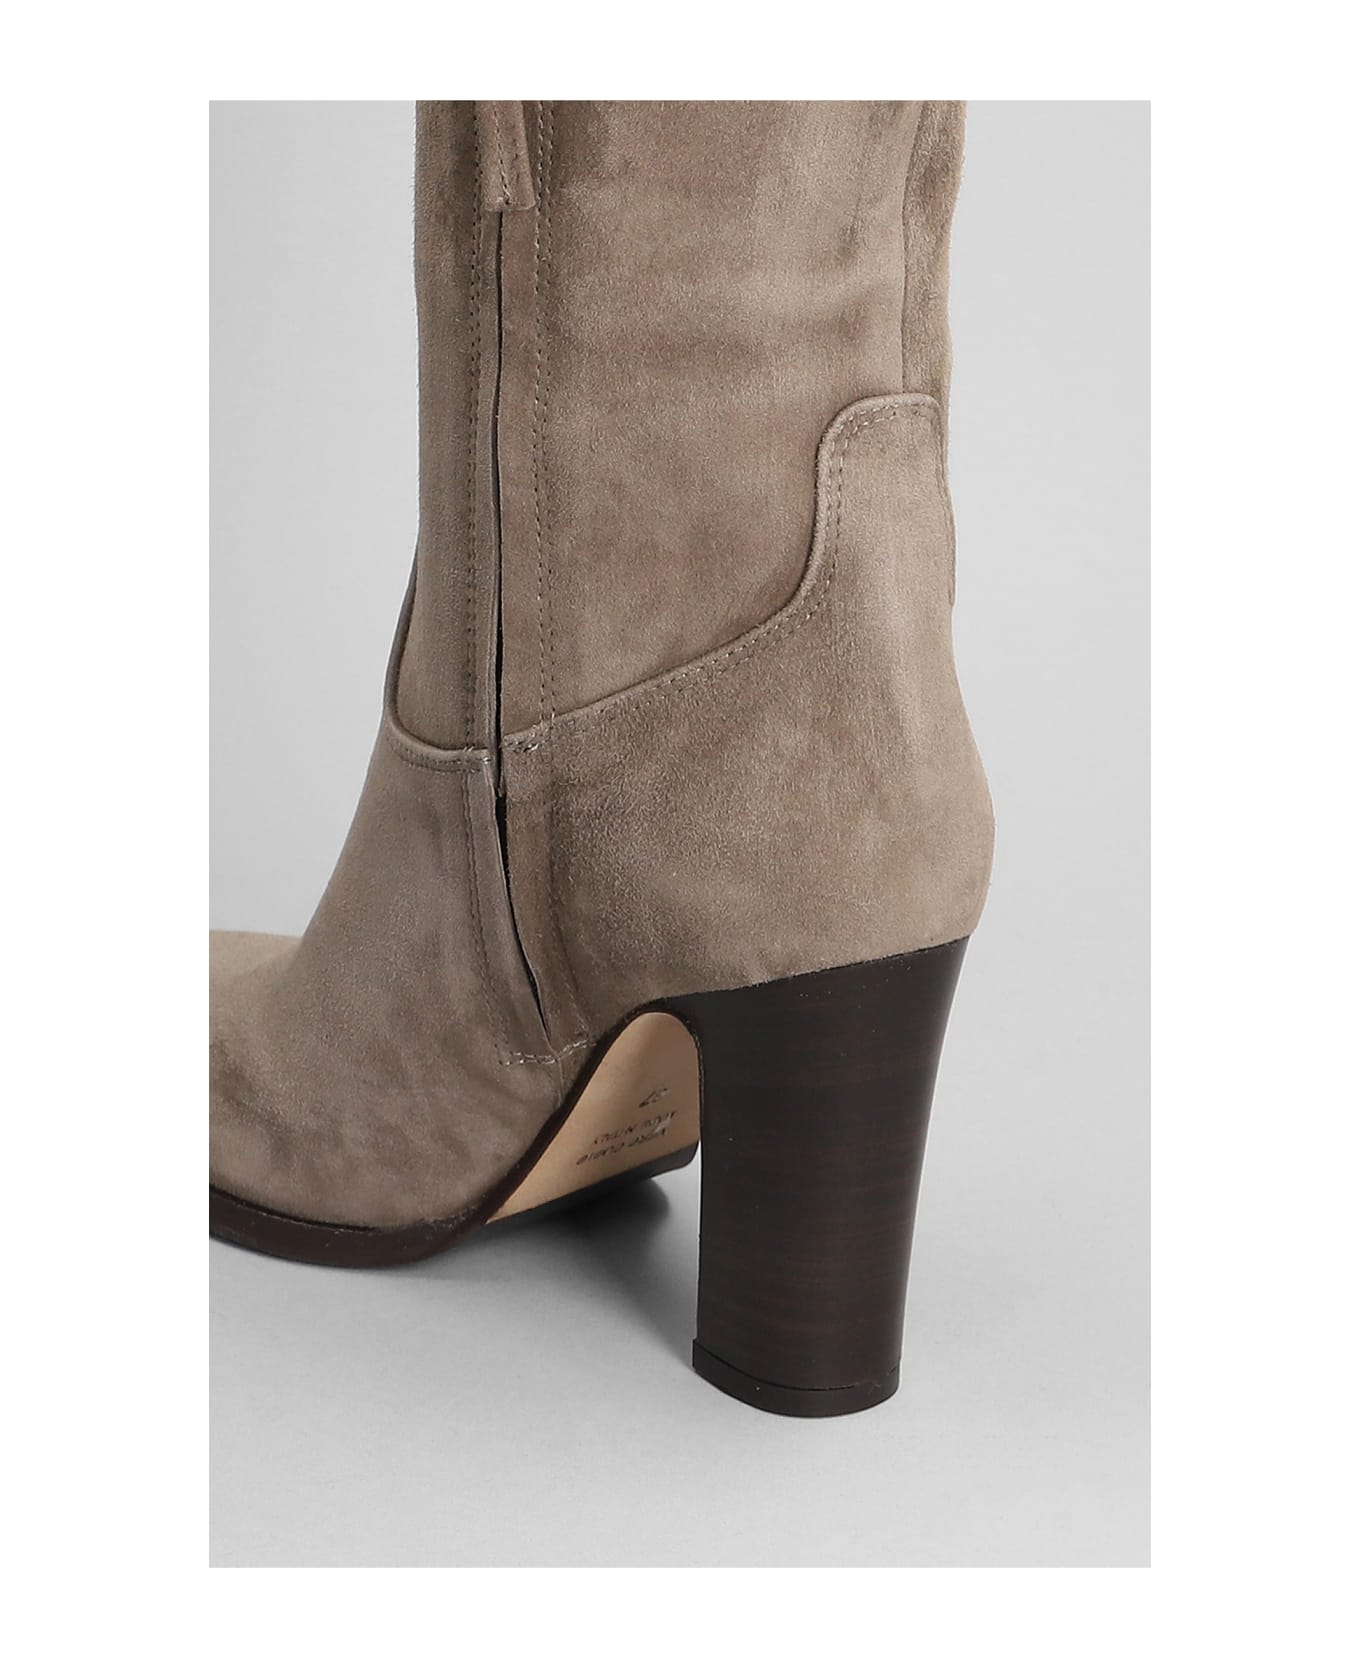 Julie Dee High Heels Boots In Taupe Suede - taupe